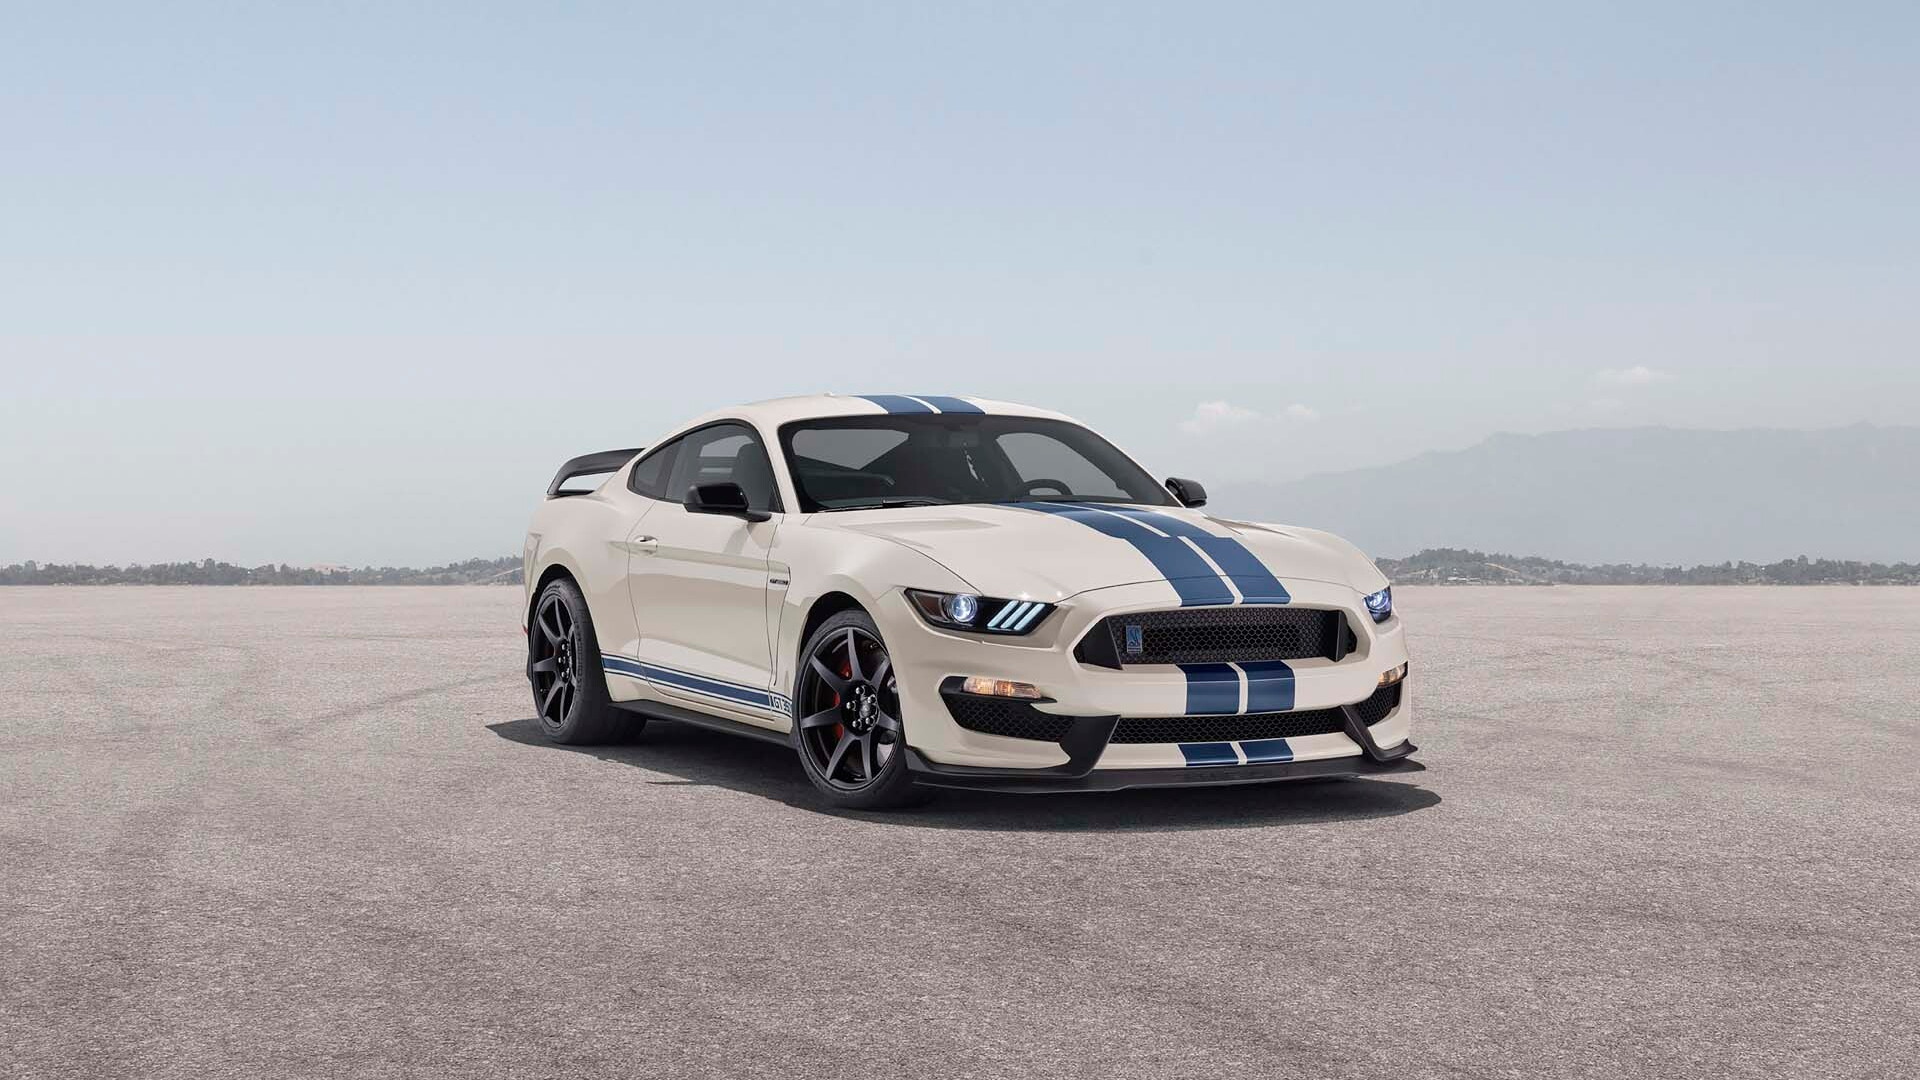 Get the 2020 Ford Shelby GT350 in Wimbledon White Guardsman Blue stripes